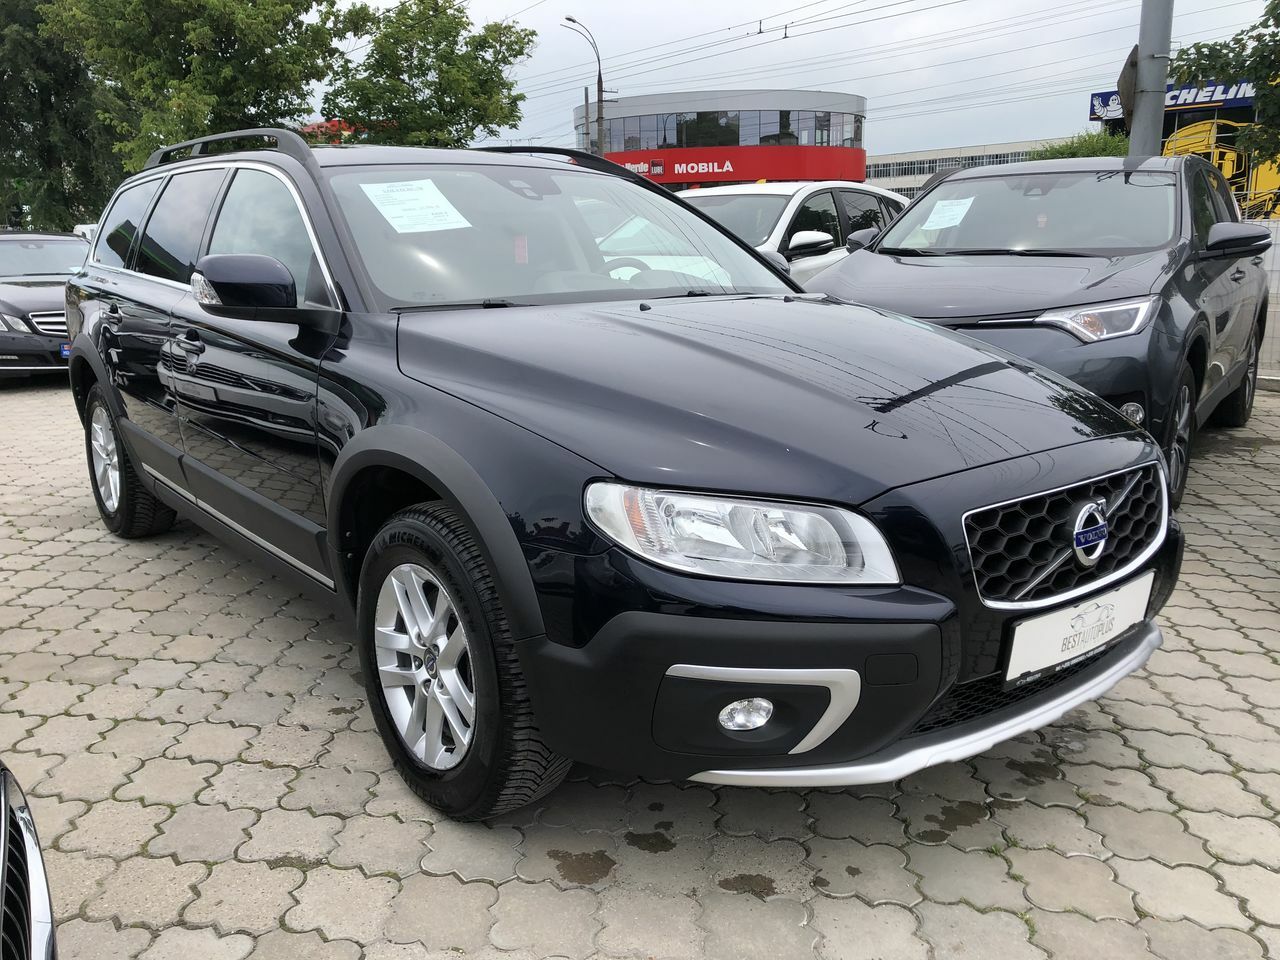 <span style="font-weight: 700;">volvo xc70&nbsp;</span>